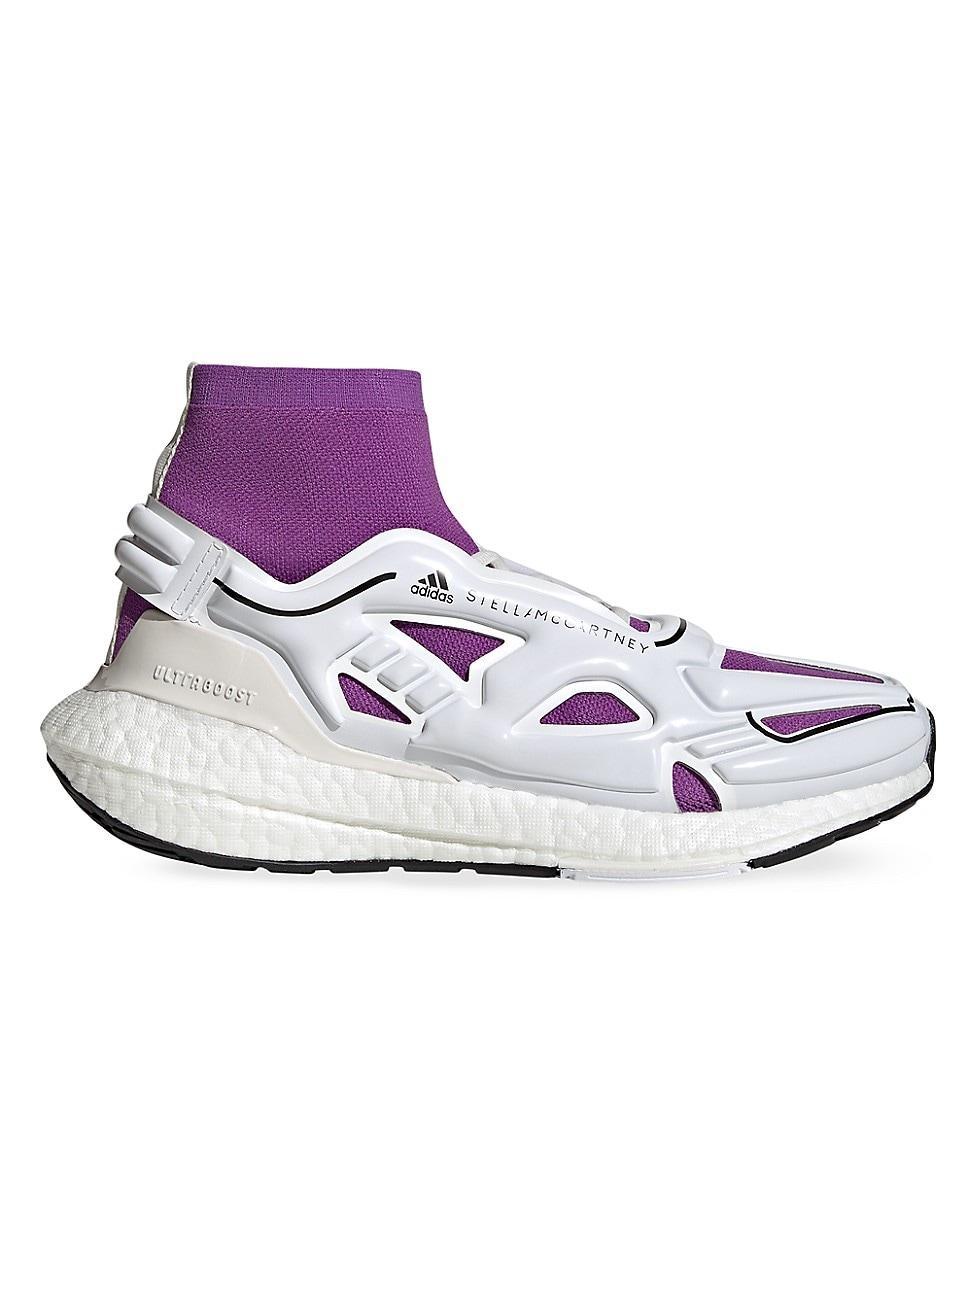 adidas by Stella McCartney Ultraboost 22 Elevated (Footwear White/Active Purple/Core Black) Women's Shoes Product Image